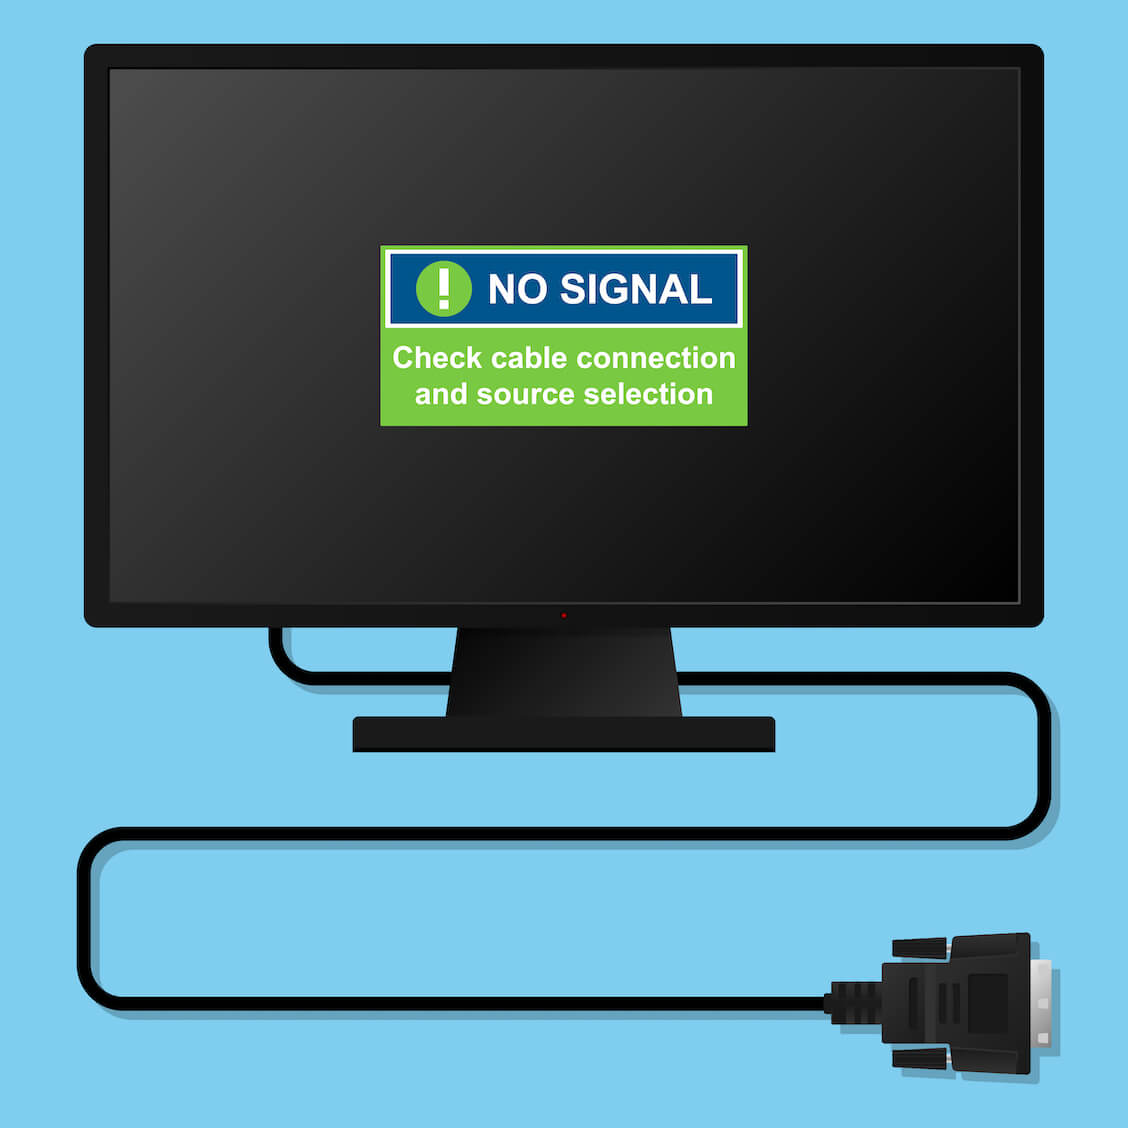 Wait for a few seconds to allow the laptop and DVI monitor to establish a connection.
Check if the DVI monitor now displays the laptop's screen properly. Look for the "No Signal" error message or any other indications of a connection issue.